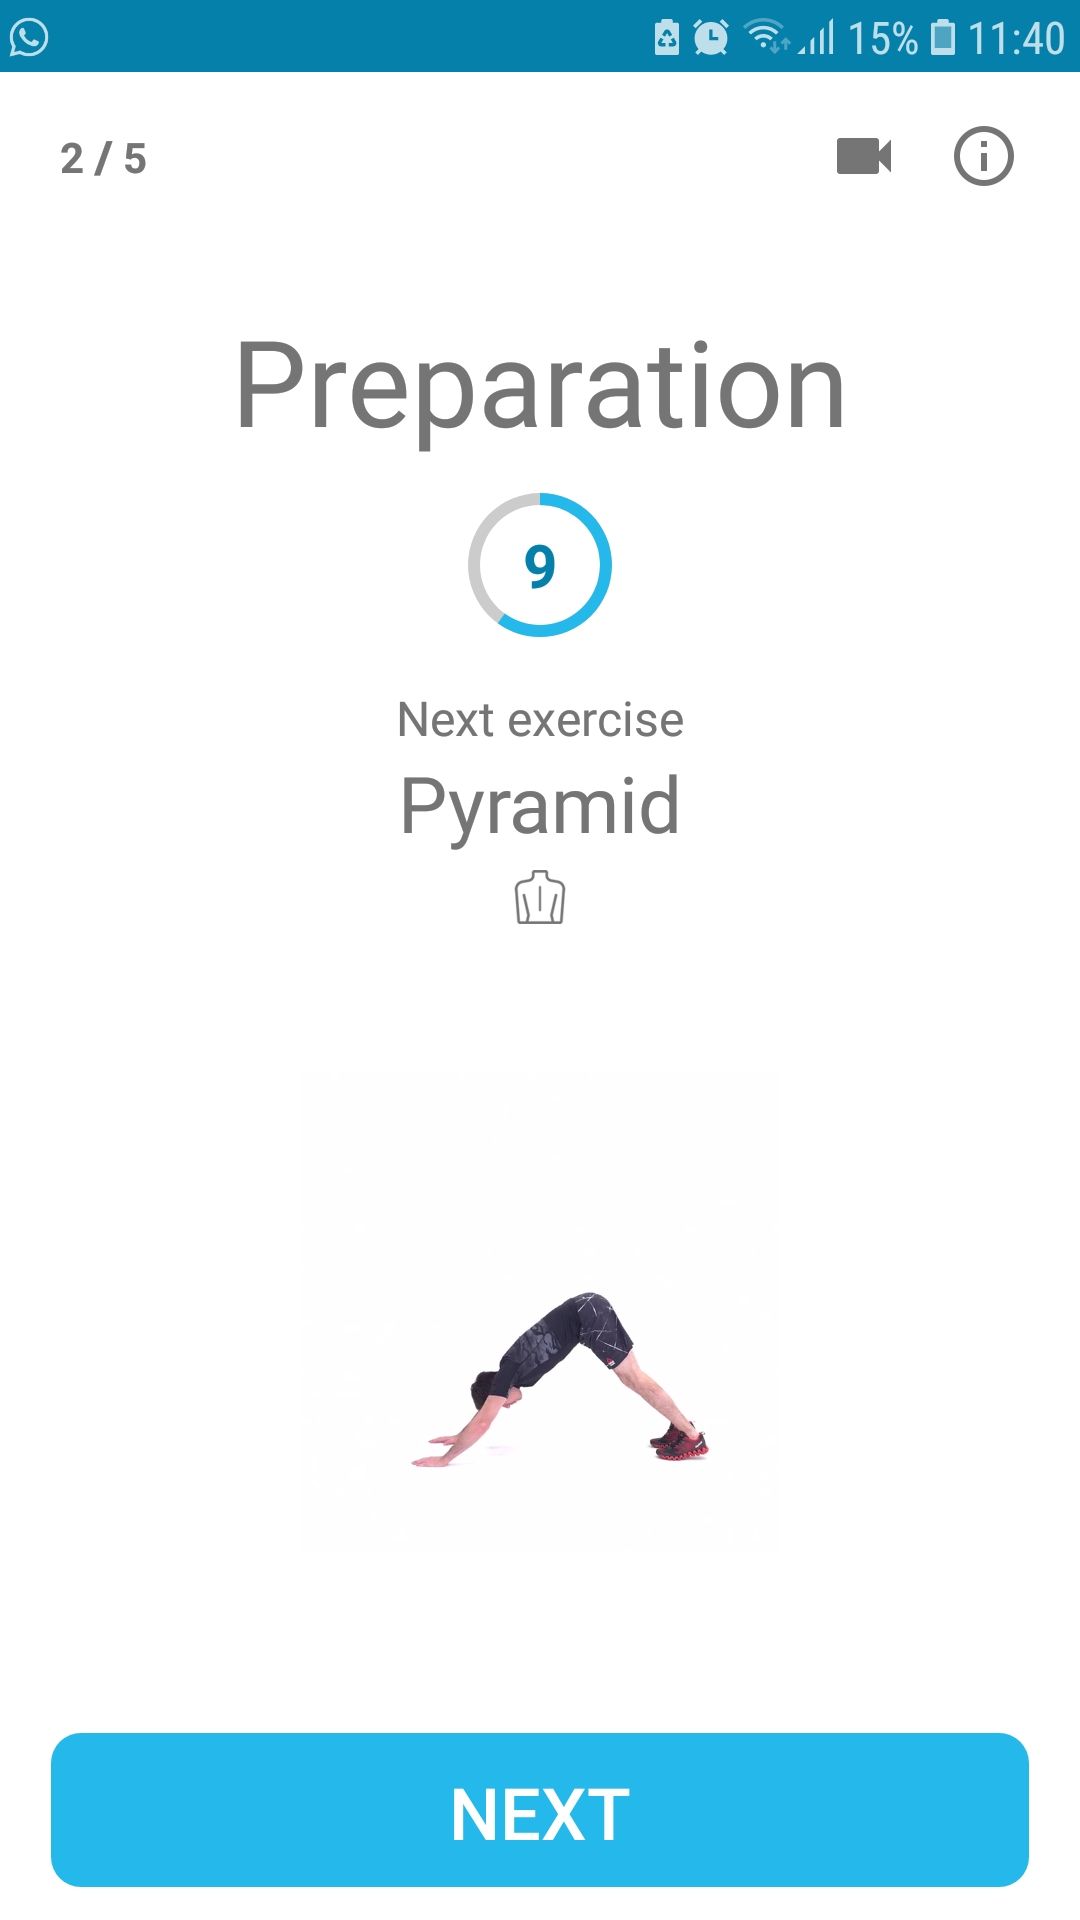 Arms & Back 21 Day Challenge mobile workout app preparation